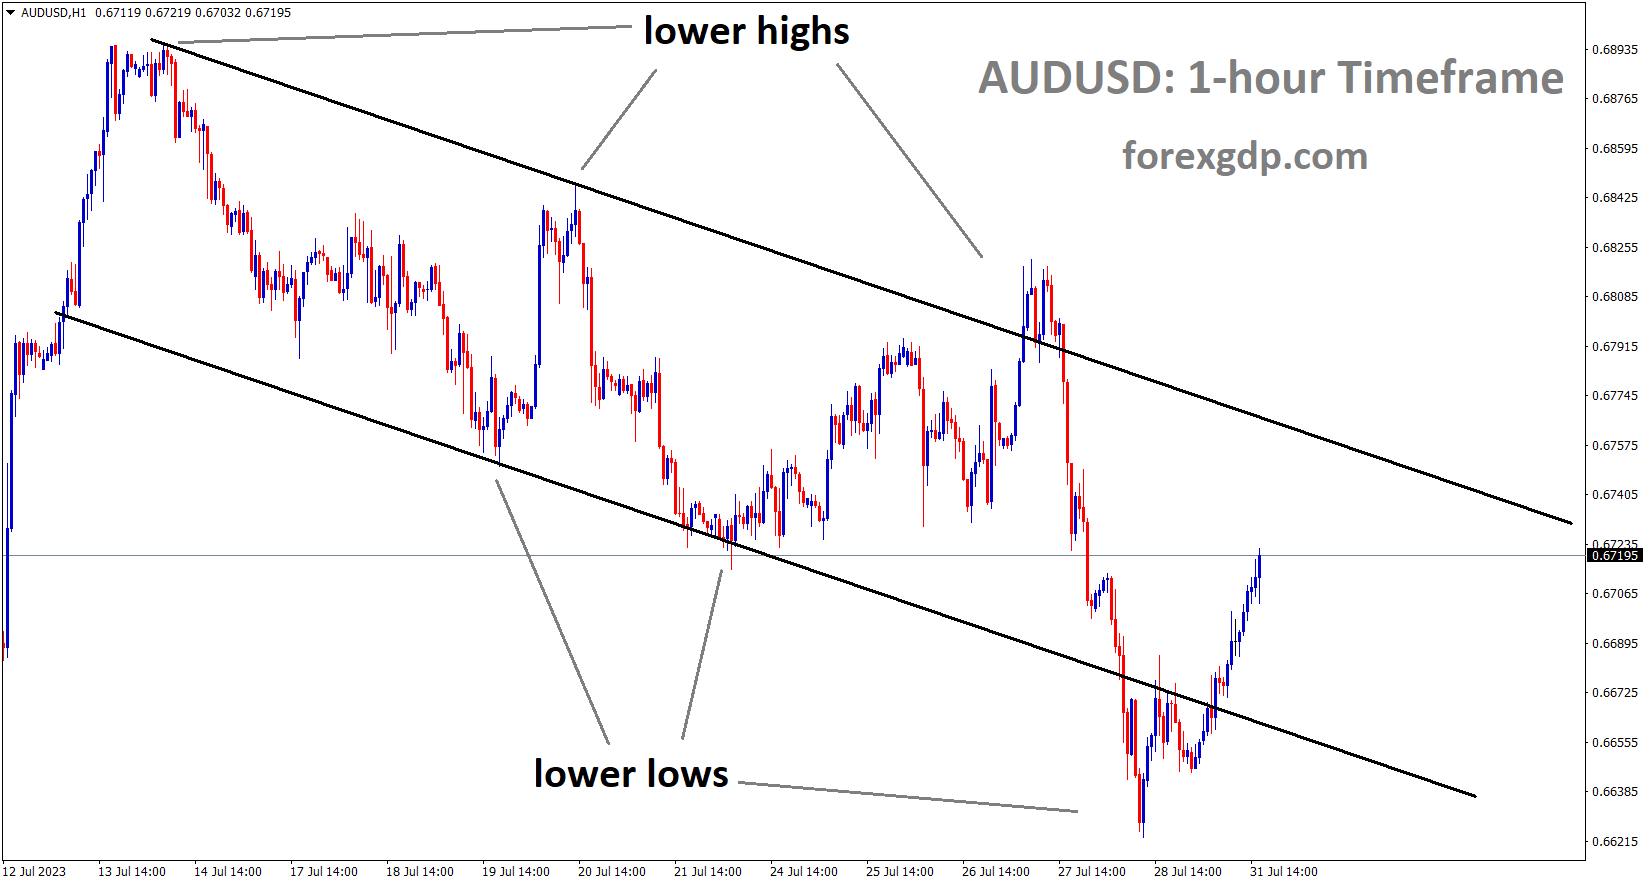 AUDUSD H1 TF analysis Market is moving in the Descending channel and the market has rebounded from the lower low area of the channel